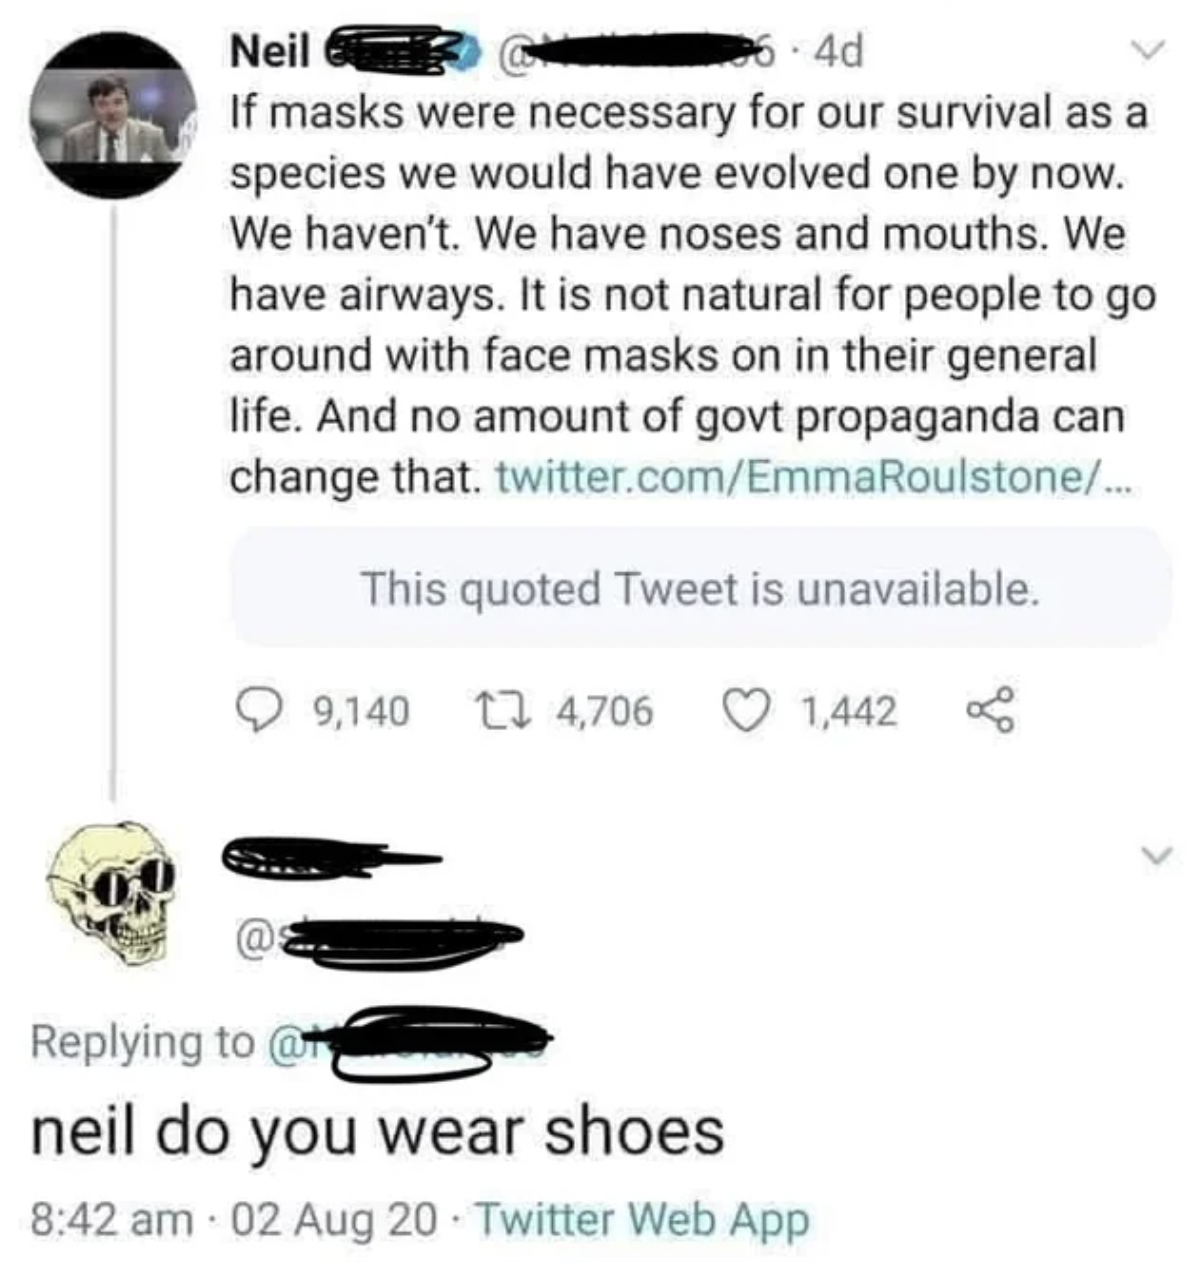 facepalms - neil do you wear shoes meme - So Neil 4d If masks were necessary for our survival as a species we would have evolved one by now. We haven't. We have noses and mouths. We have airways. It is not natural for people to go around with face masks o